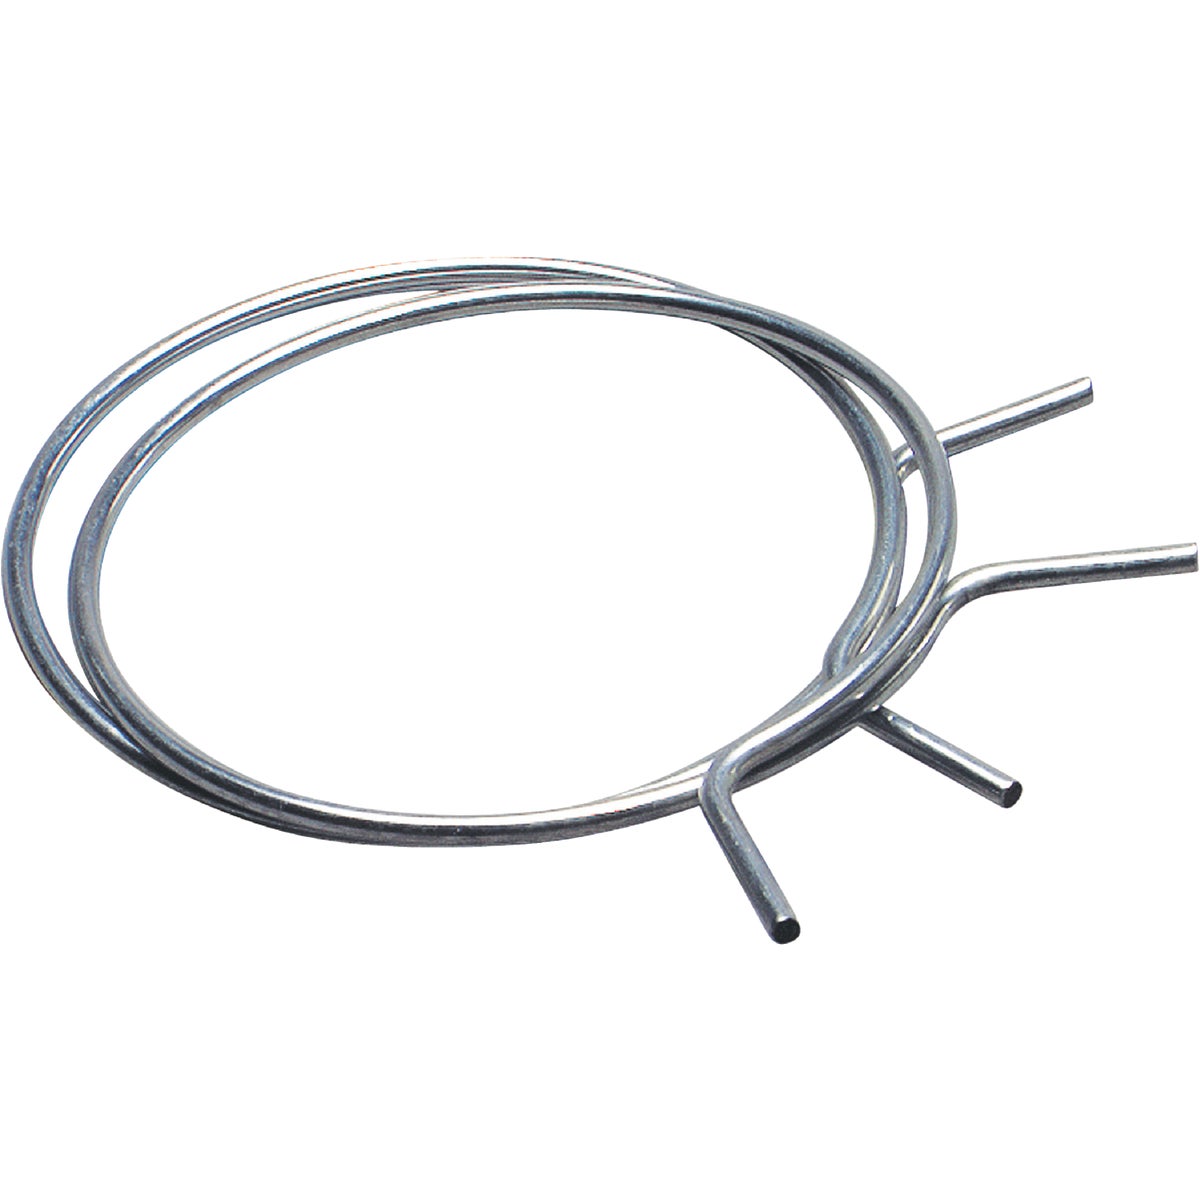 Item 260614, Aluminum tension clamps are ideal for use with flexible or semi-rigid ducts